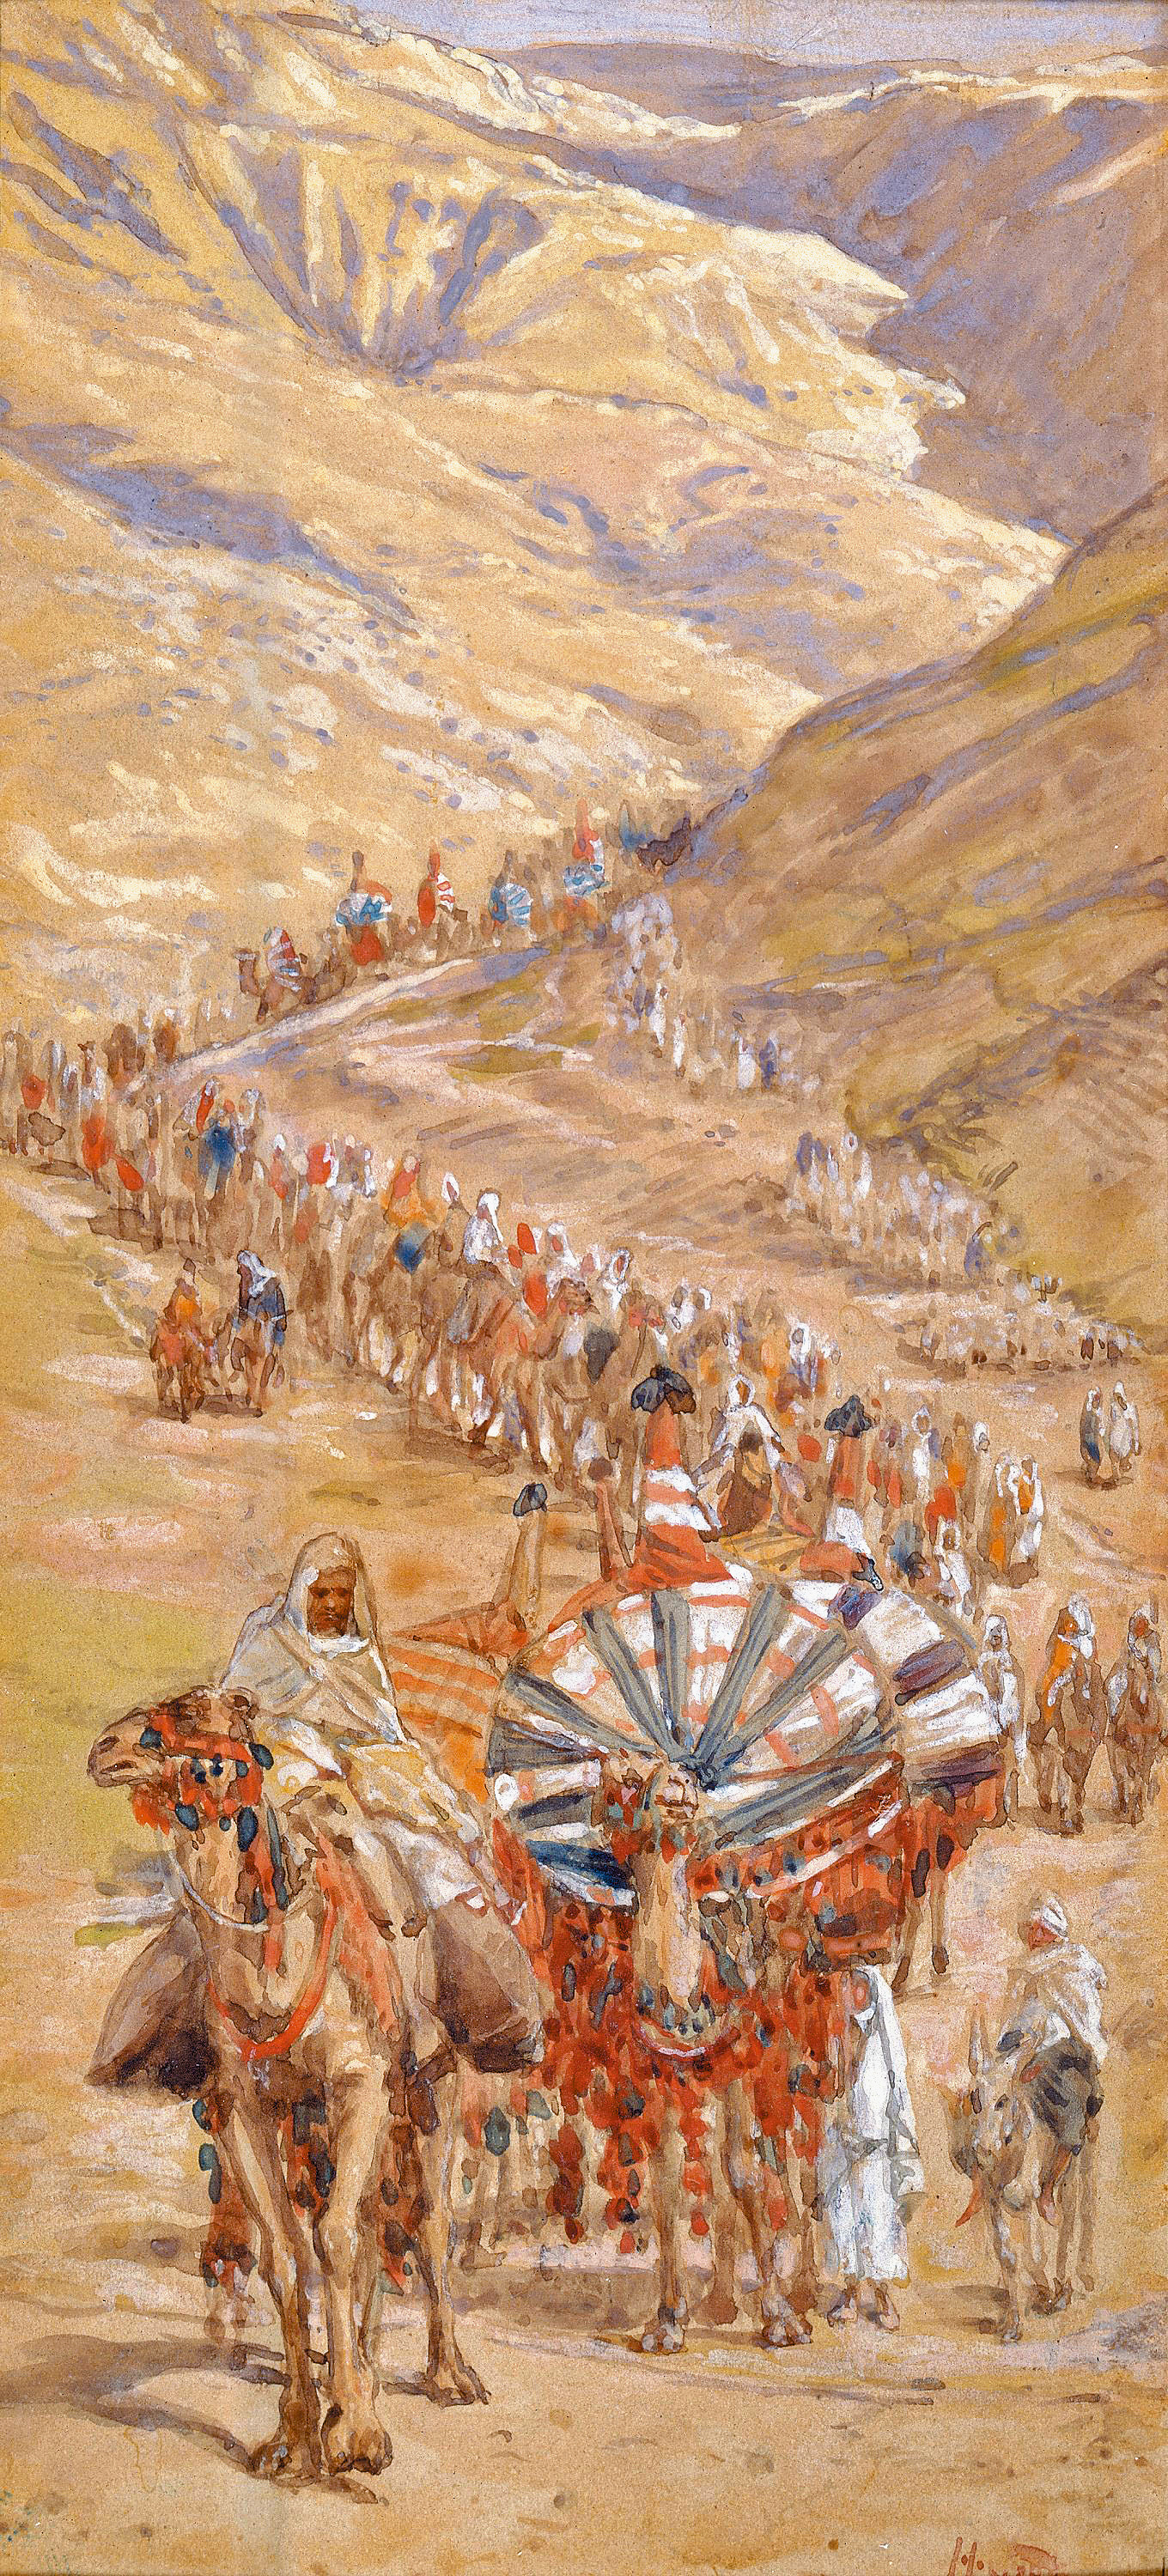 The Caravan of Abraham, by James Tissot, before 1903